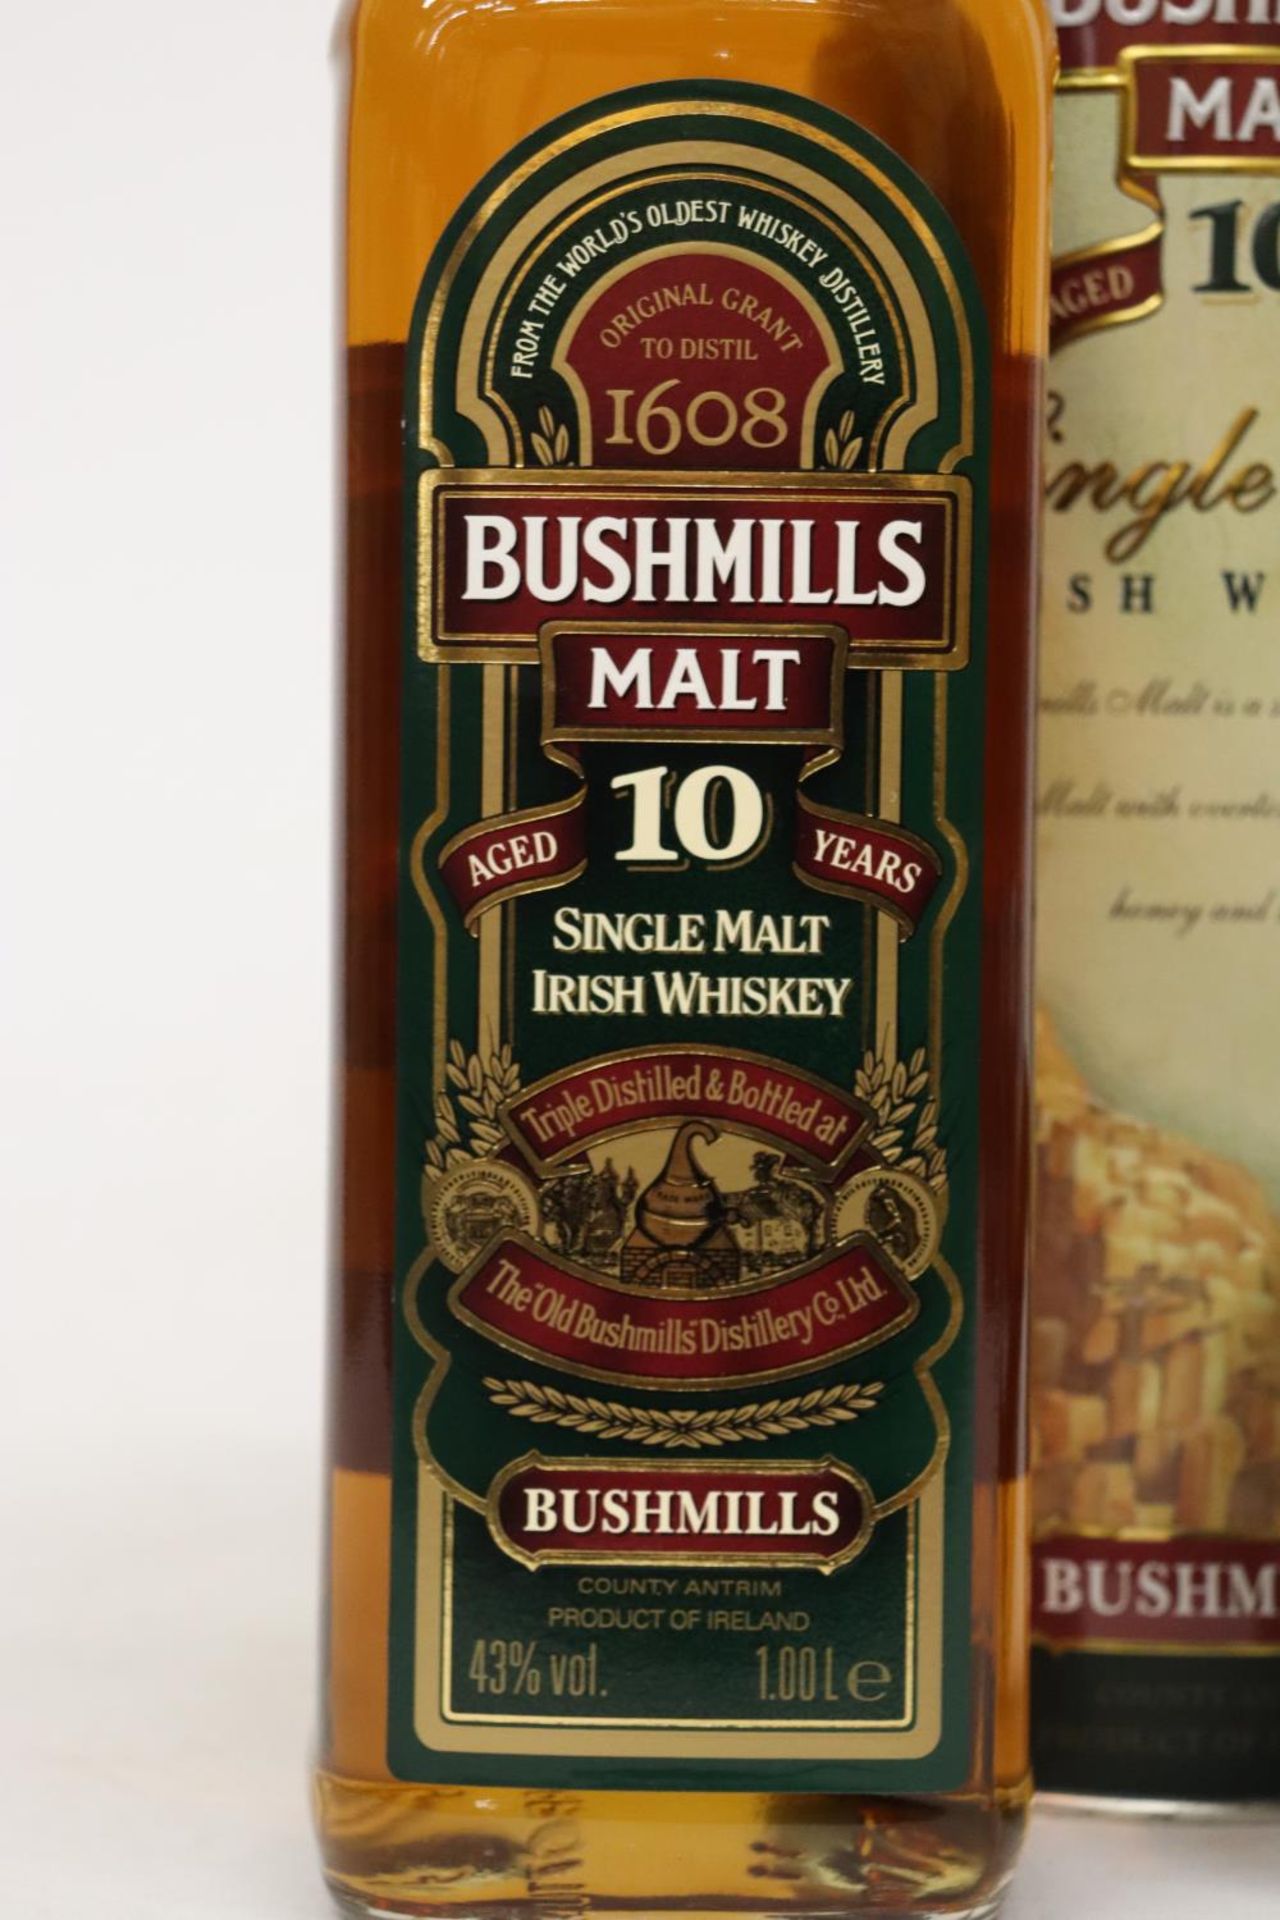 A BOTTLE OF BUSHMILLS 10 YEAR OLD MALT WHISKY, BOXED - Image 3 of 5